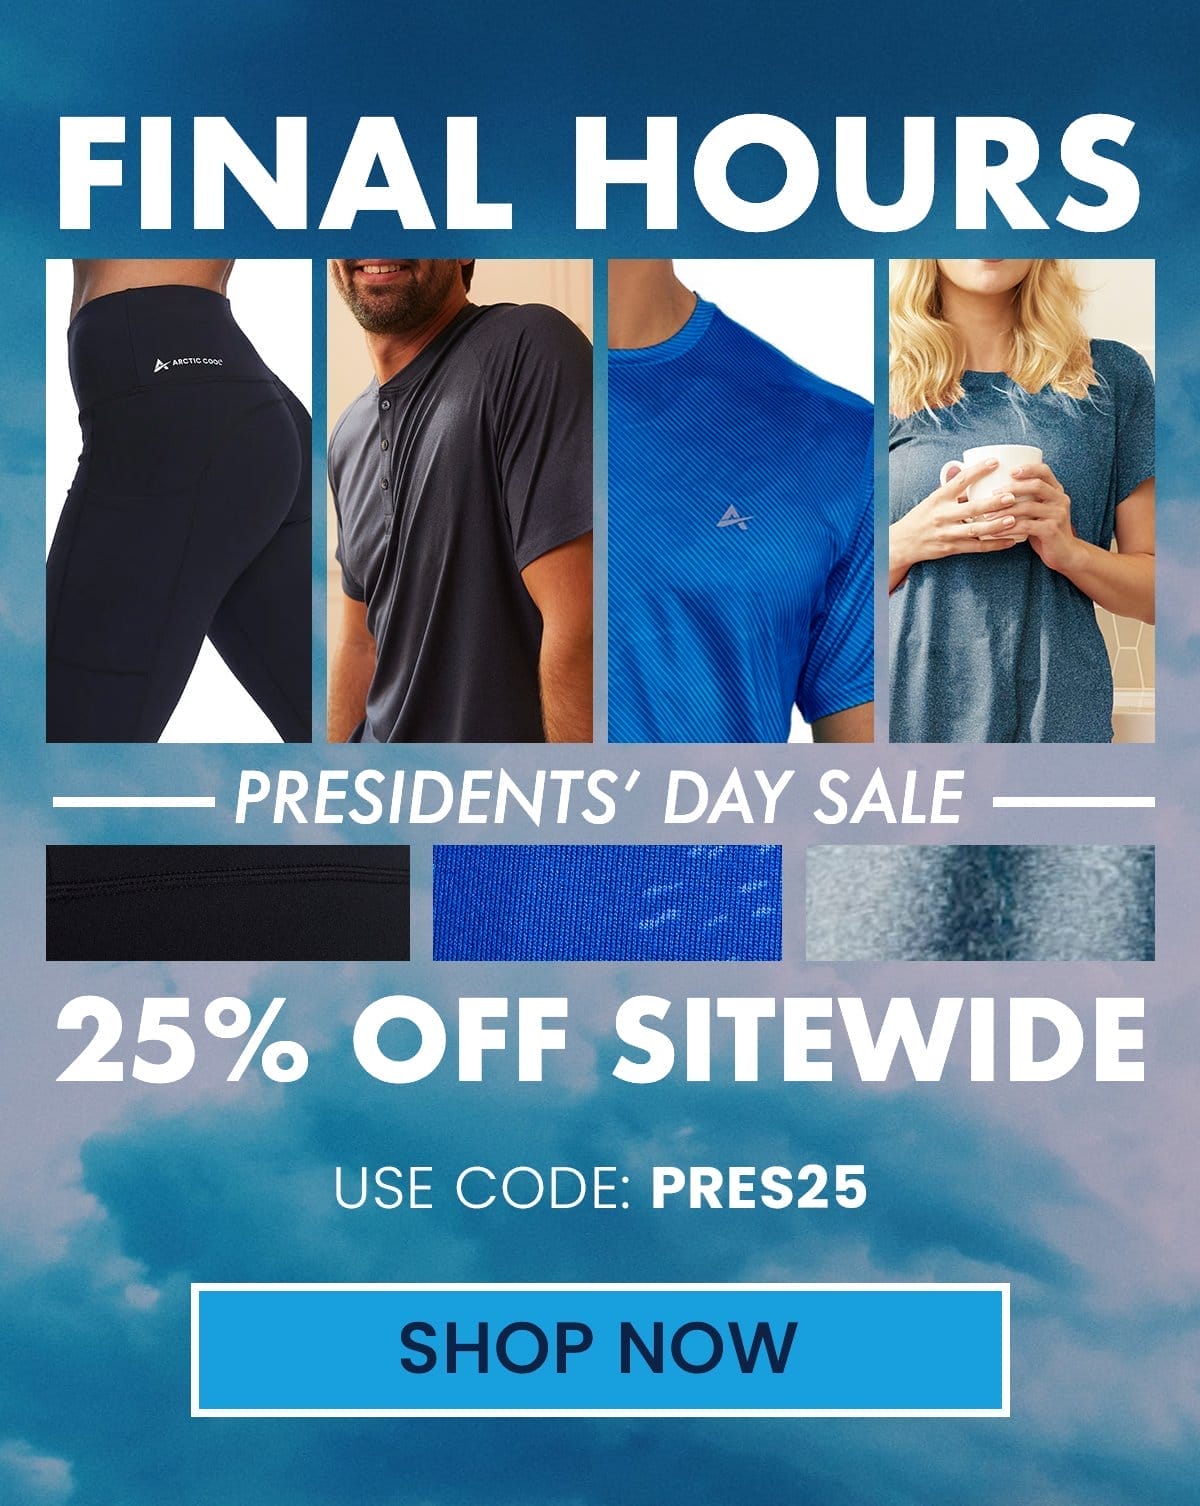 FINAL HOURS PRESIDENT’S DAY SALE 25% OFF SITEWIDE USE CODE: PRES25 CTA: SHOP NOW